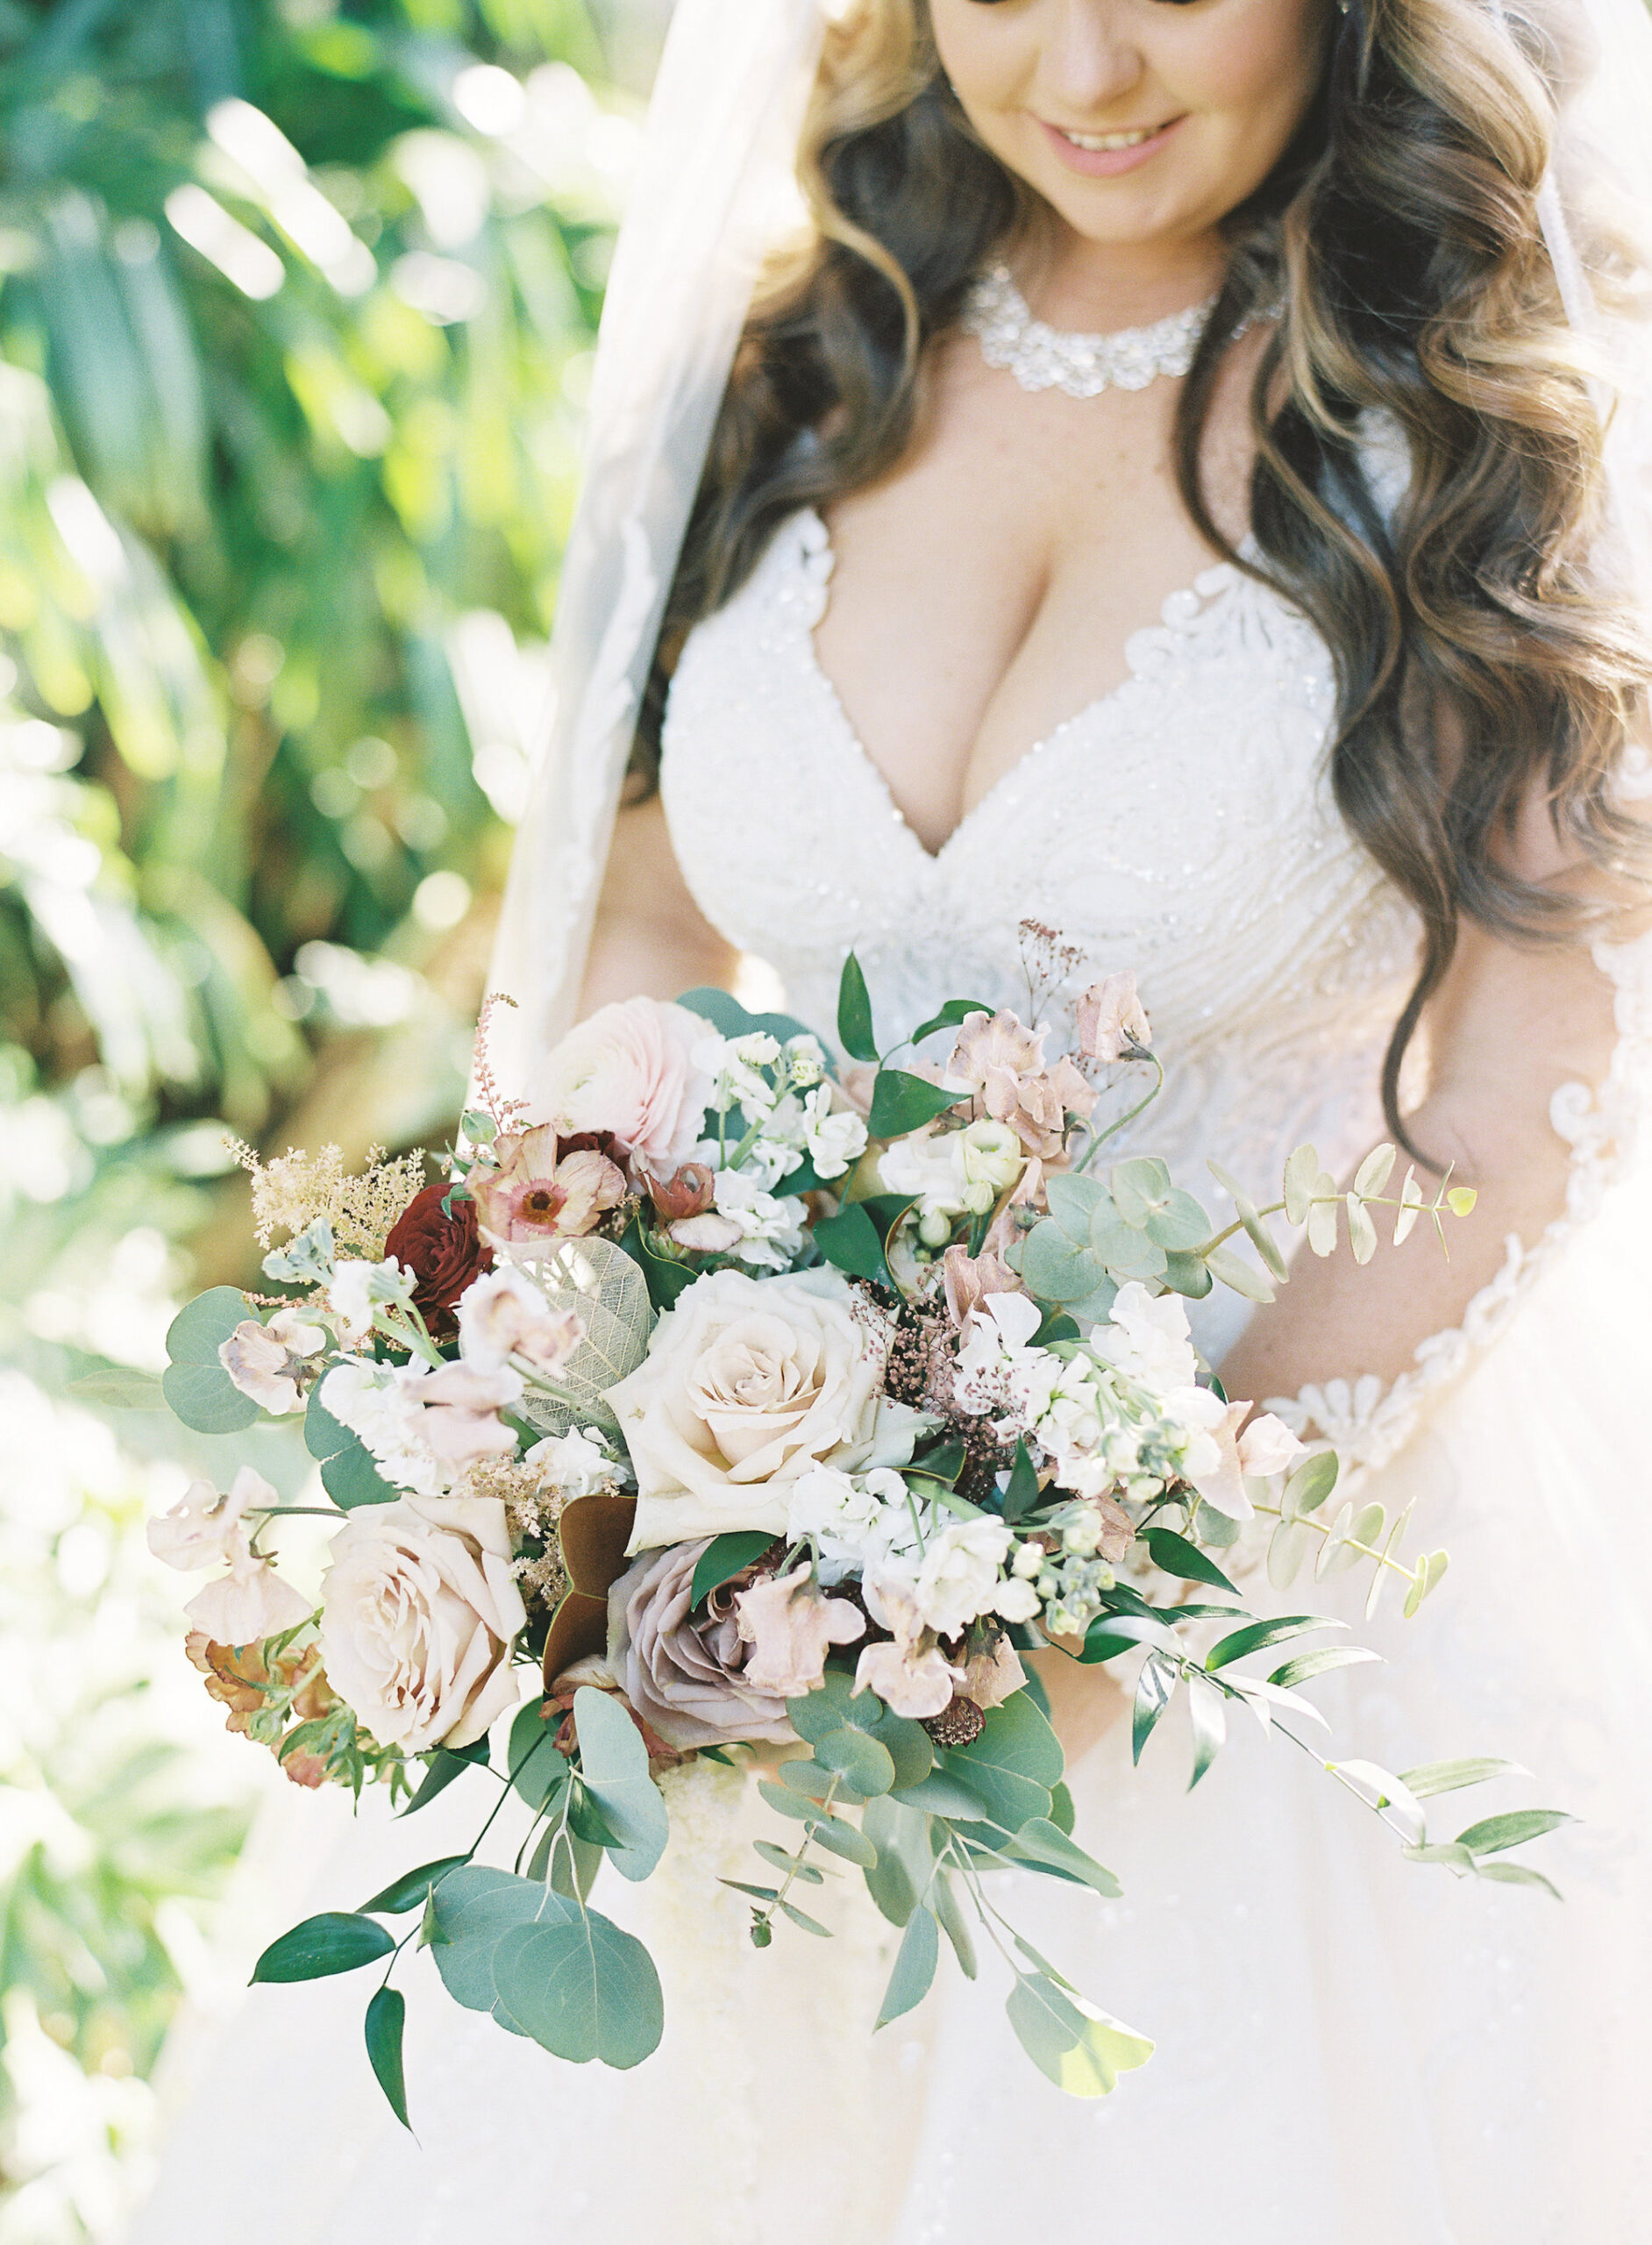 Royal Glam Gatsby Bride Wedding Beauty Portrait Holding Lush Mauve, Blush Pink Roses with Greenery Eucalyptus Floral Bouquet